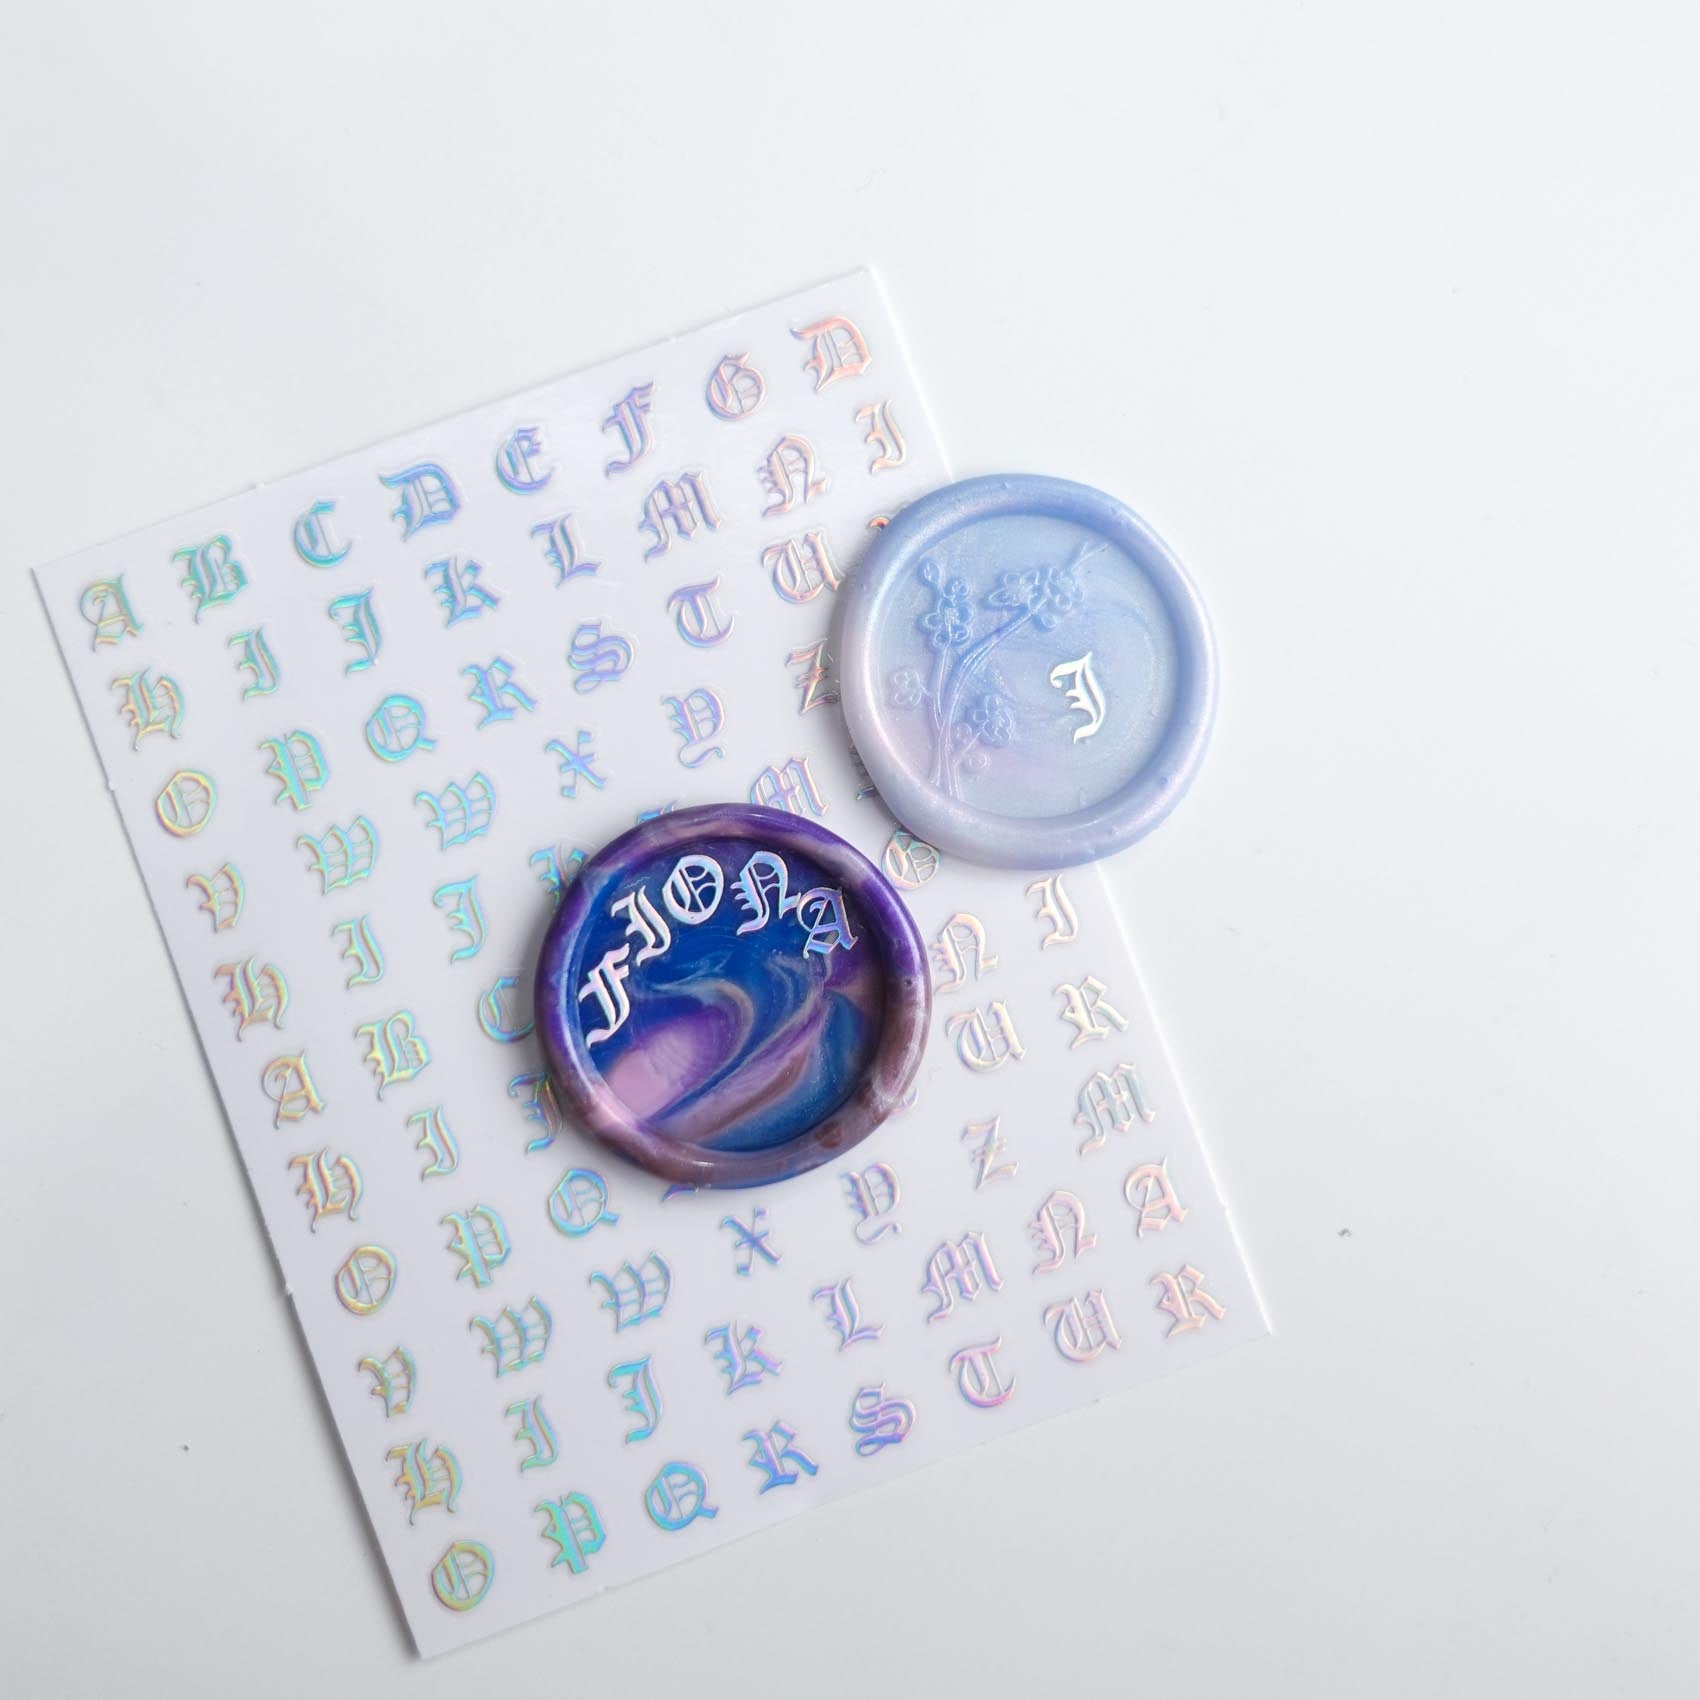 Holographic Alphabet Letters Gothic Script Clear-Backed Decorative Stickers Sheet